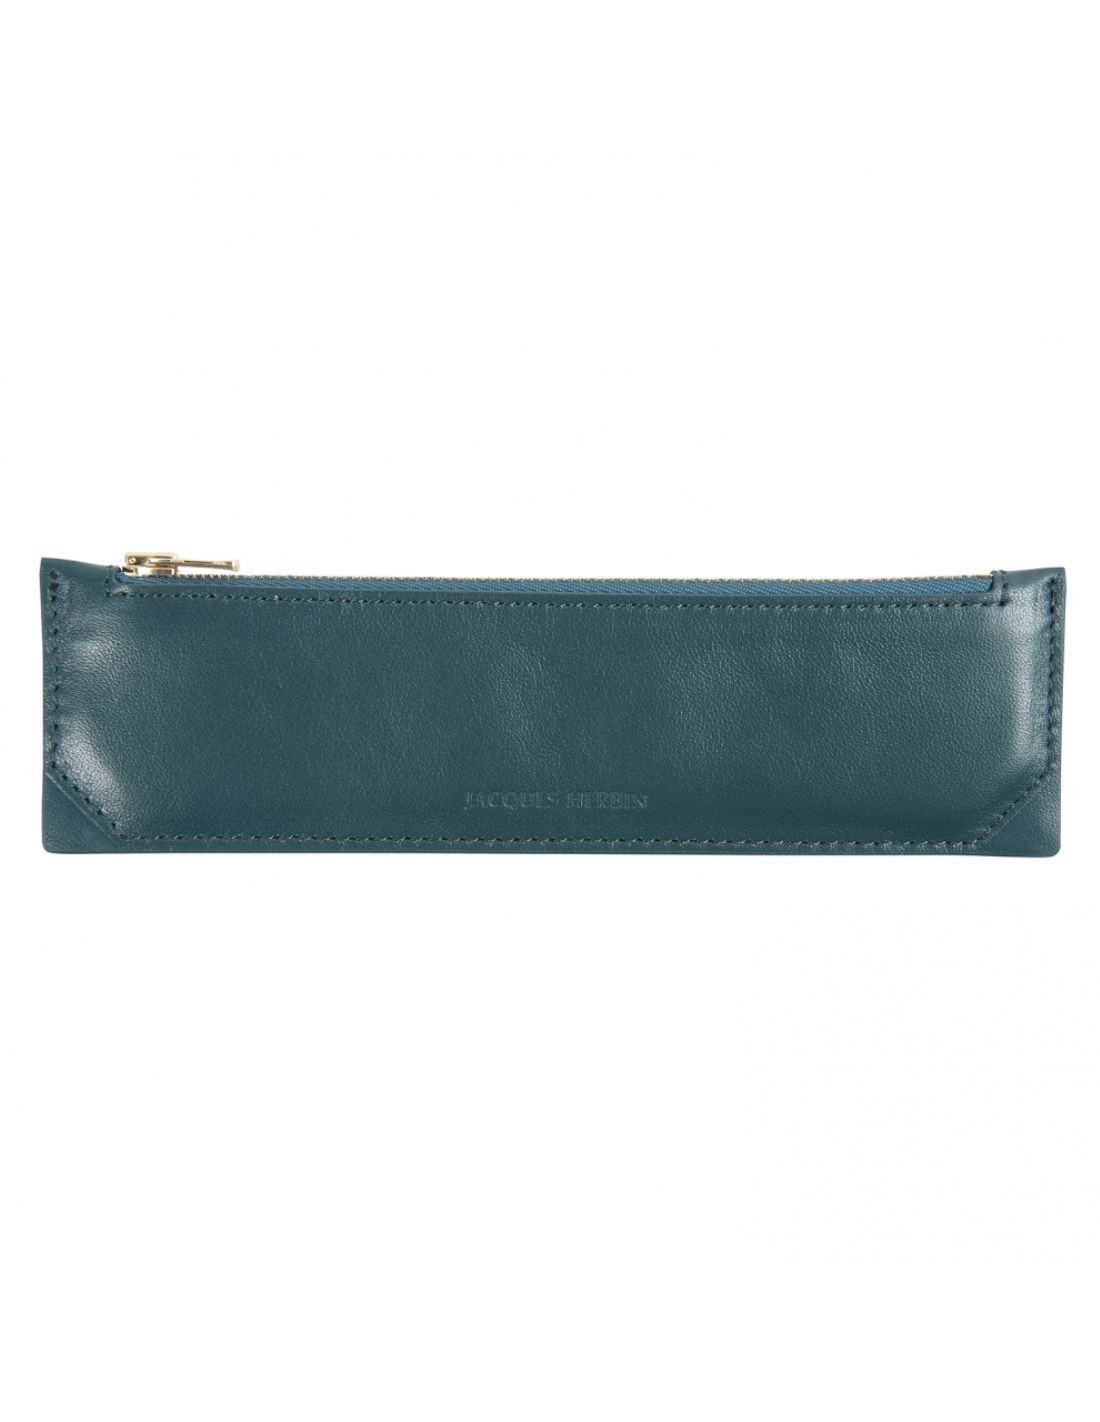 Leather Pencase - Small - Emerald - Jacques Herbin